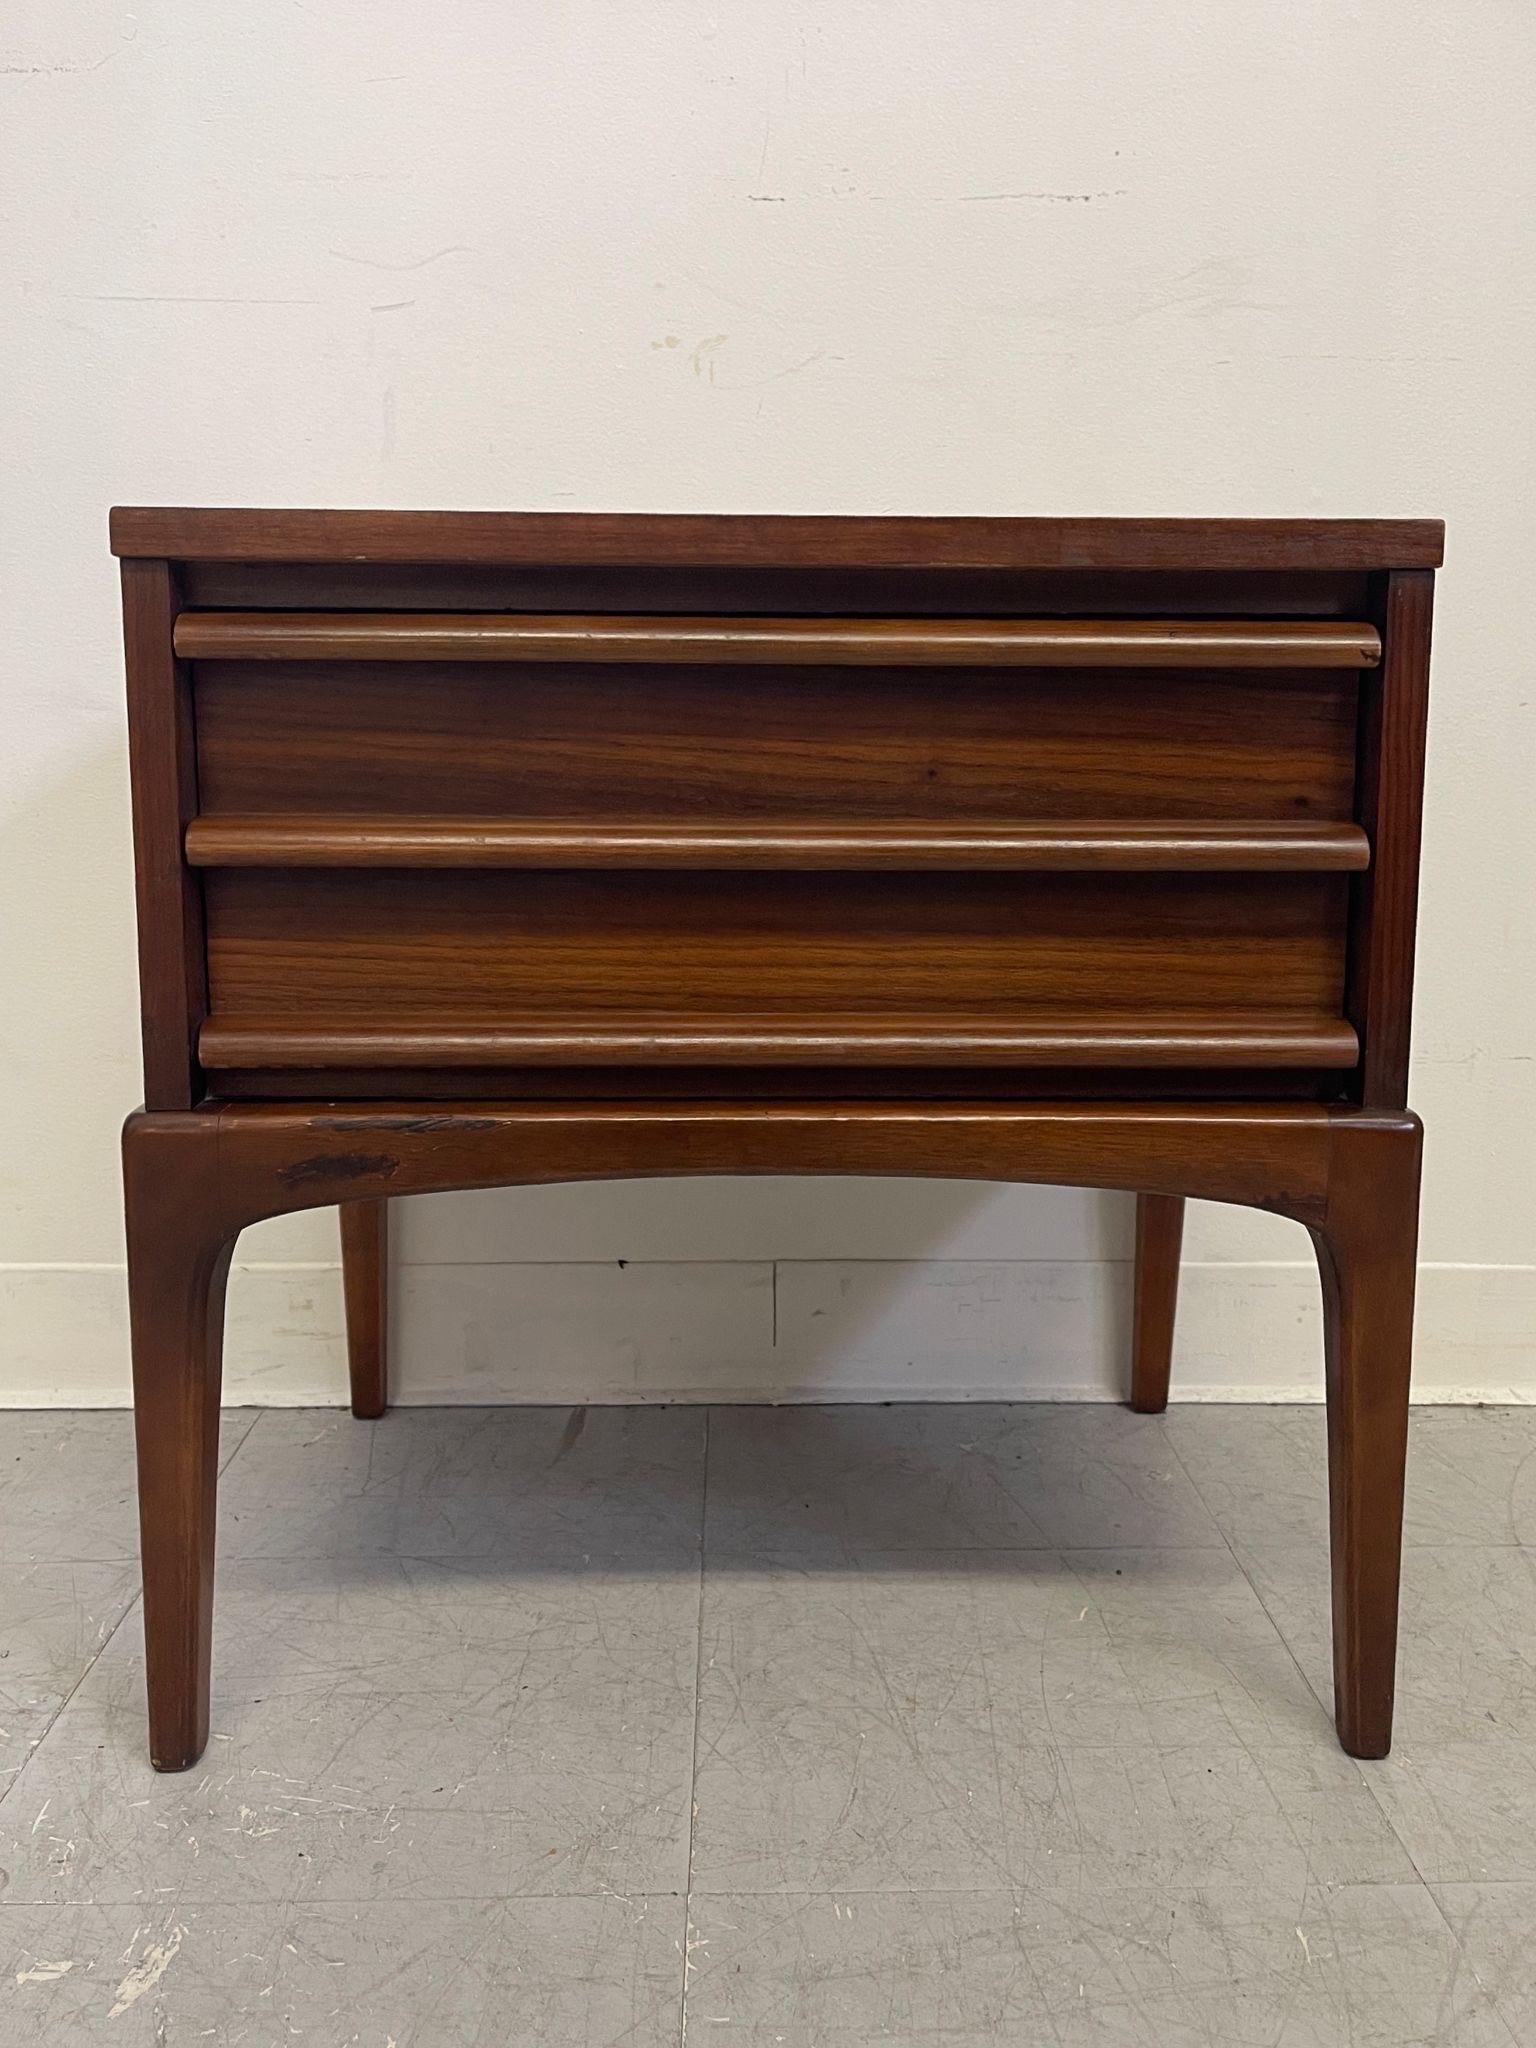 This night Stand has a single dovetailed drawer with carved wood handles. Beautiful contrast of wood veneers on the top edge banding. Walnut Toned wood. Vintage Condition Consistent with Age as Pictured.

Dimensions. 22 W ; 17 D ; 22 H